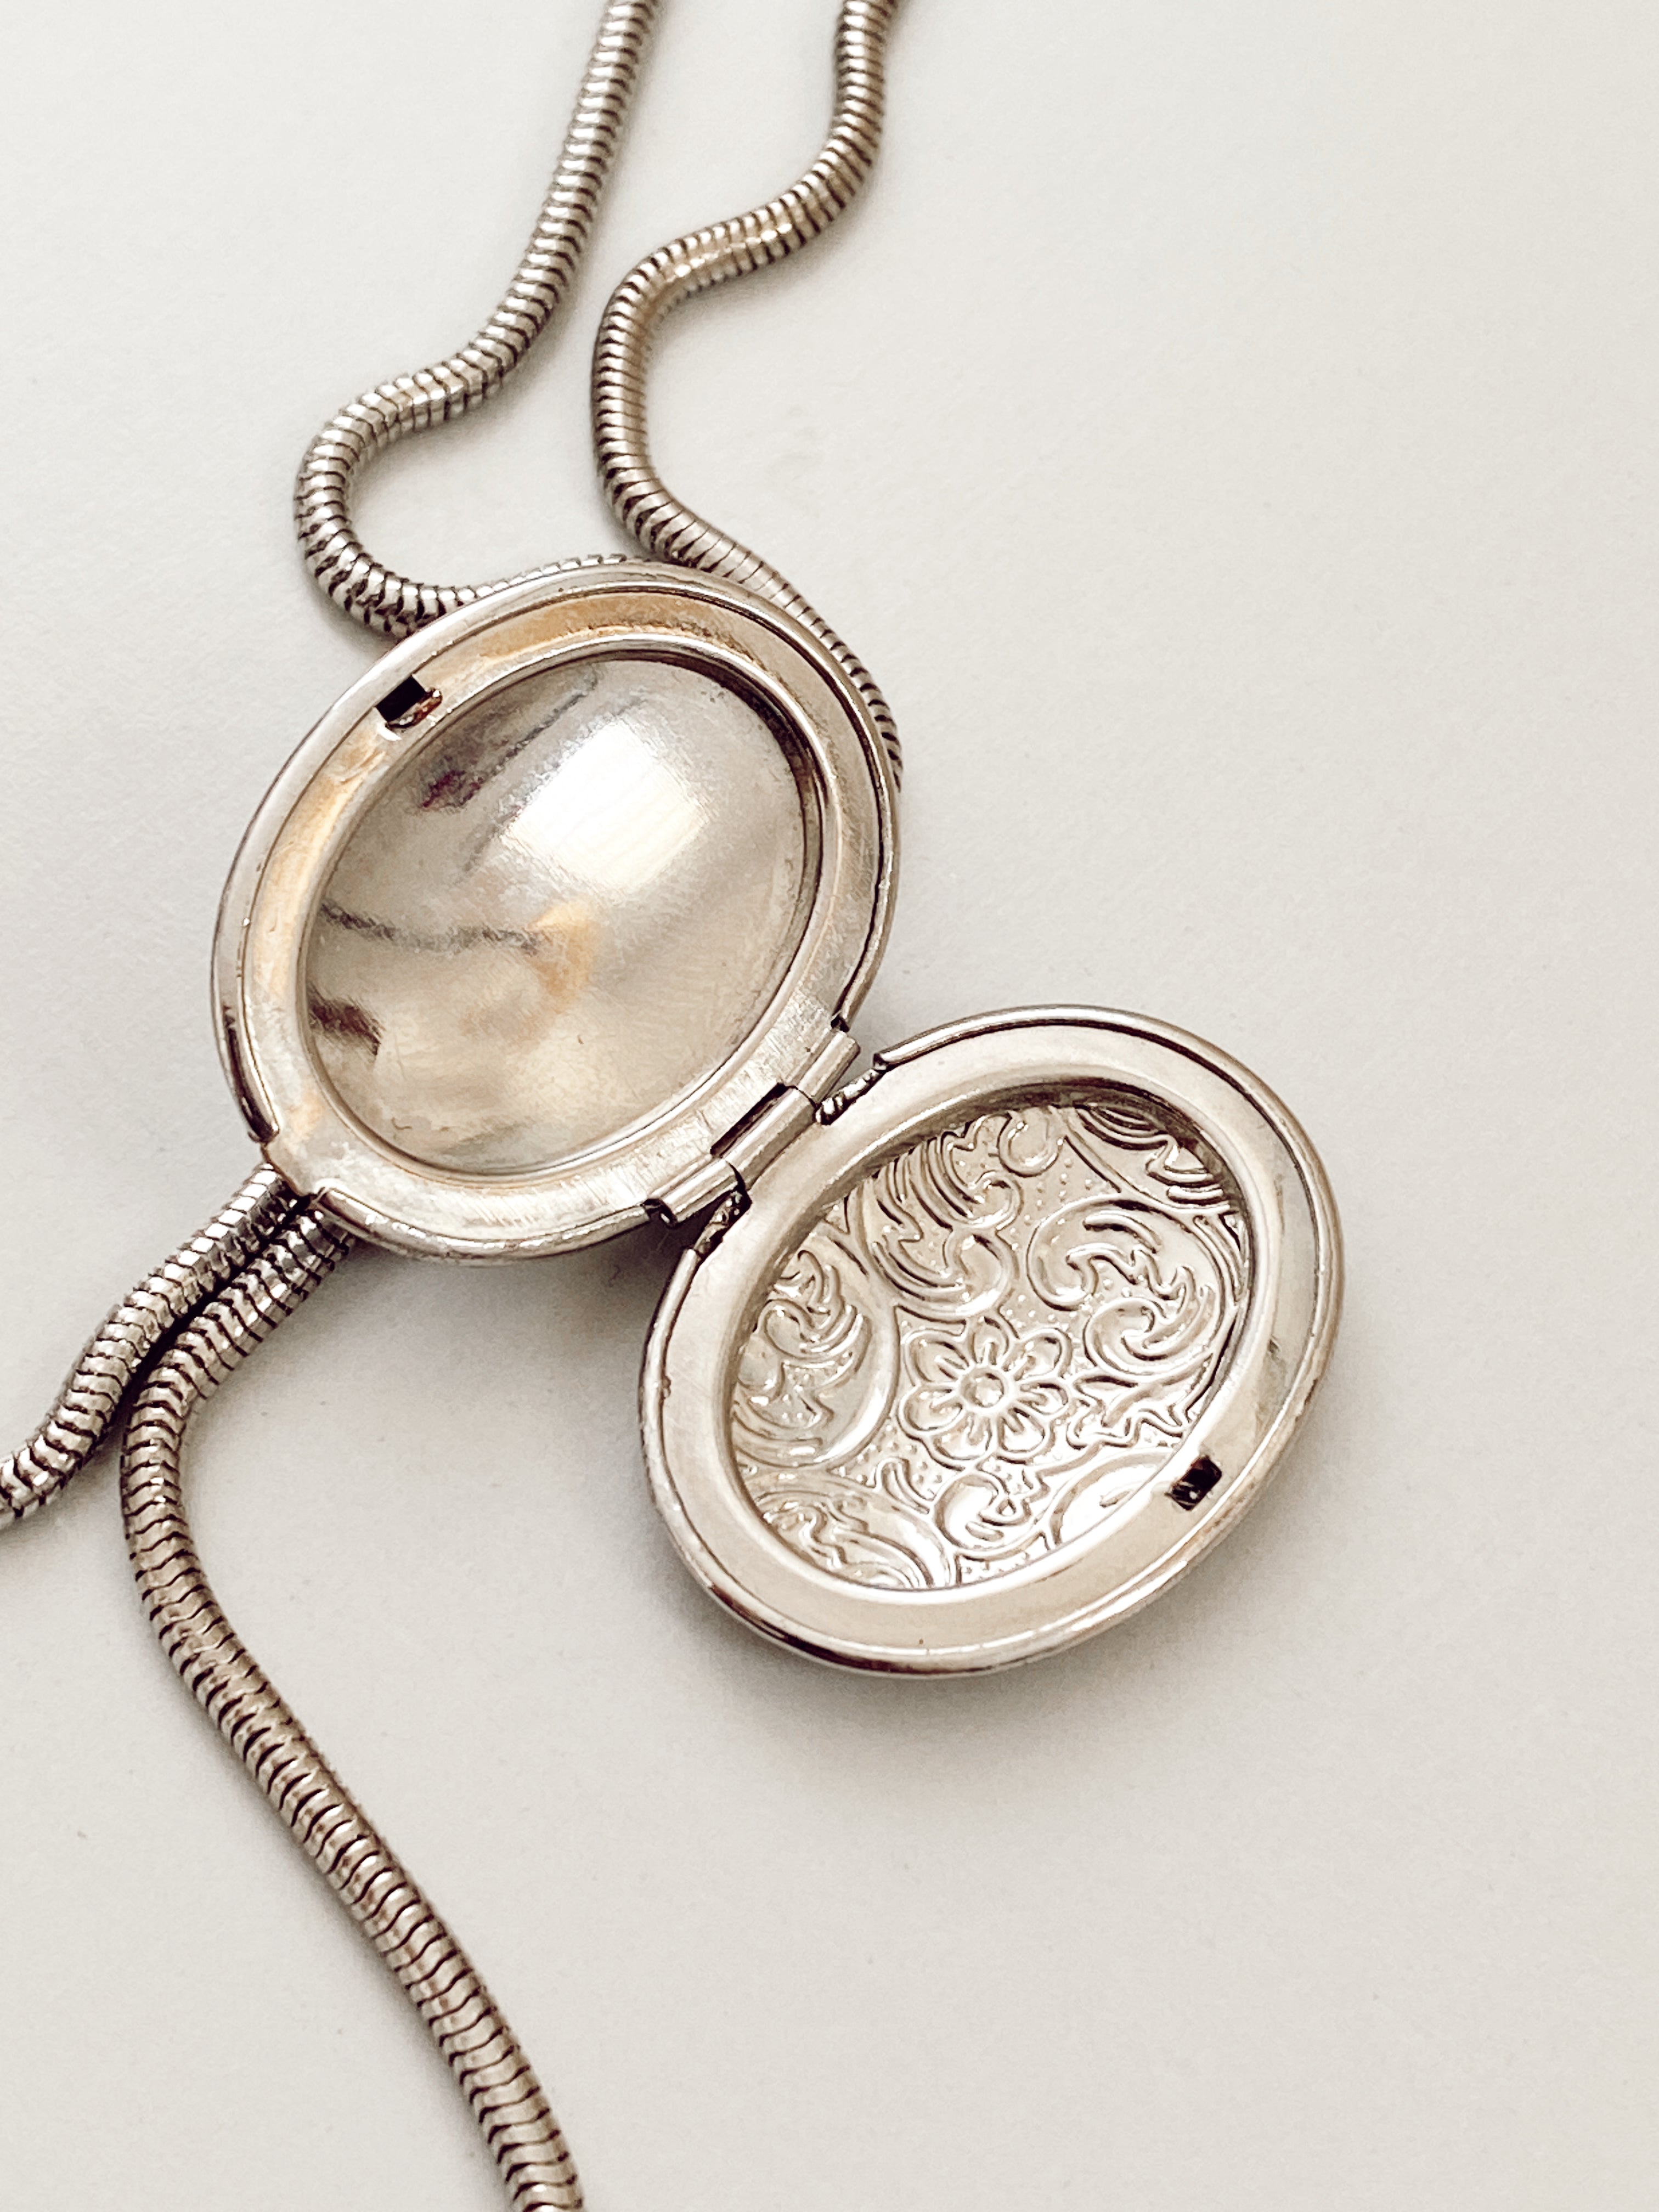 Oval Floral Etched Locket Silver Bolo Tie